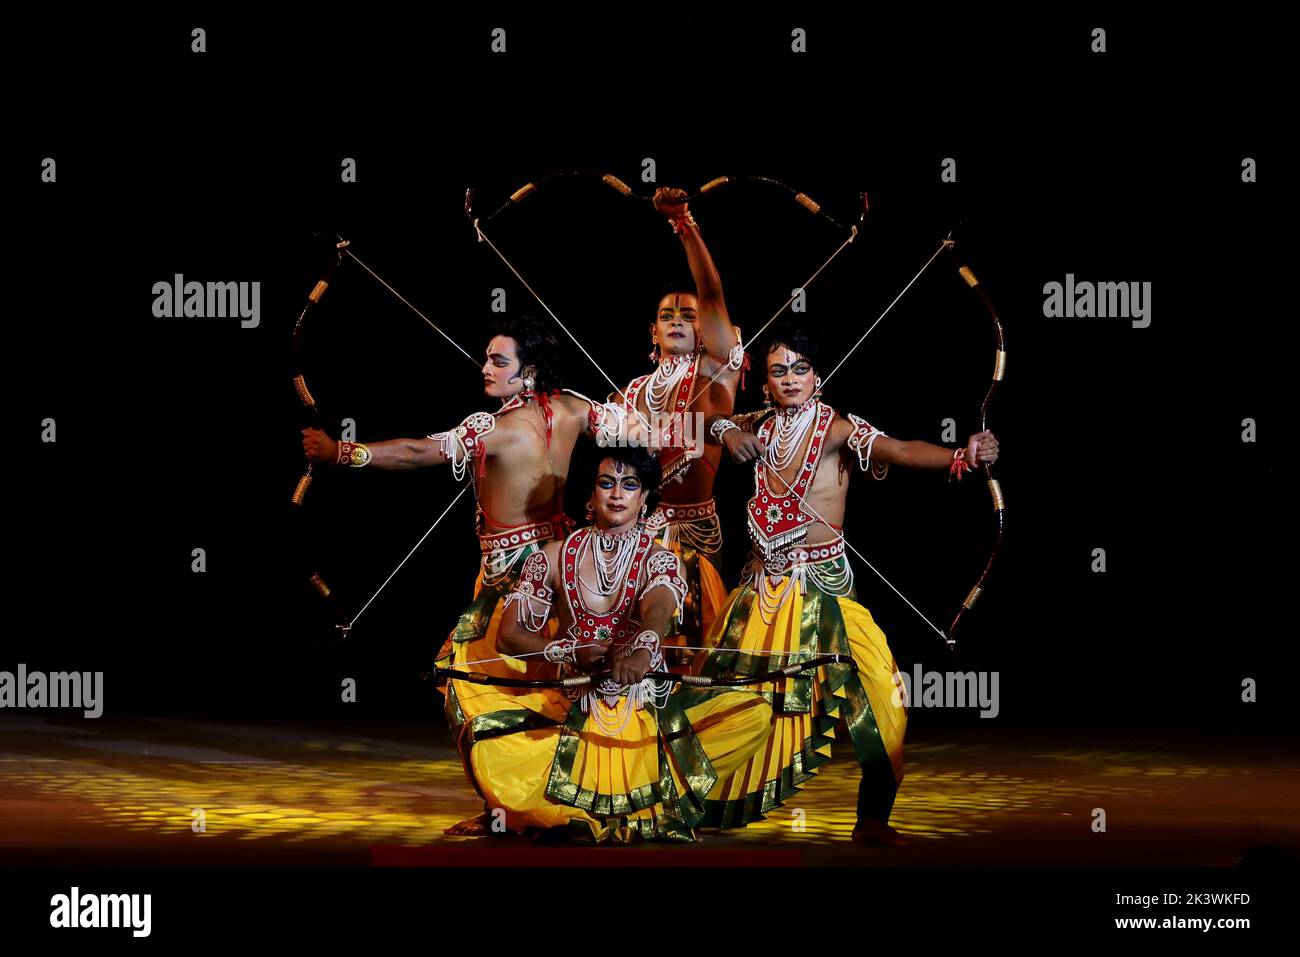 Artists perform 'Ramlila,' a 10-day enactment of the life of Hindu deity Rama which culminates in the festival of Dussehra, organised by Shriram Bharatiya Kala Kendra. The 10 days are also known as the Vijayadashami celebration, at the end of Navratri every year. The day marks Lord Ram's defeat over the evil king of the demons, Ravana. Stock Photo